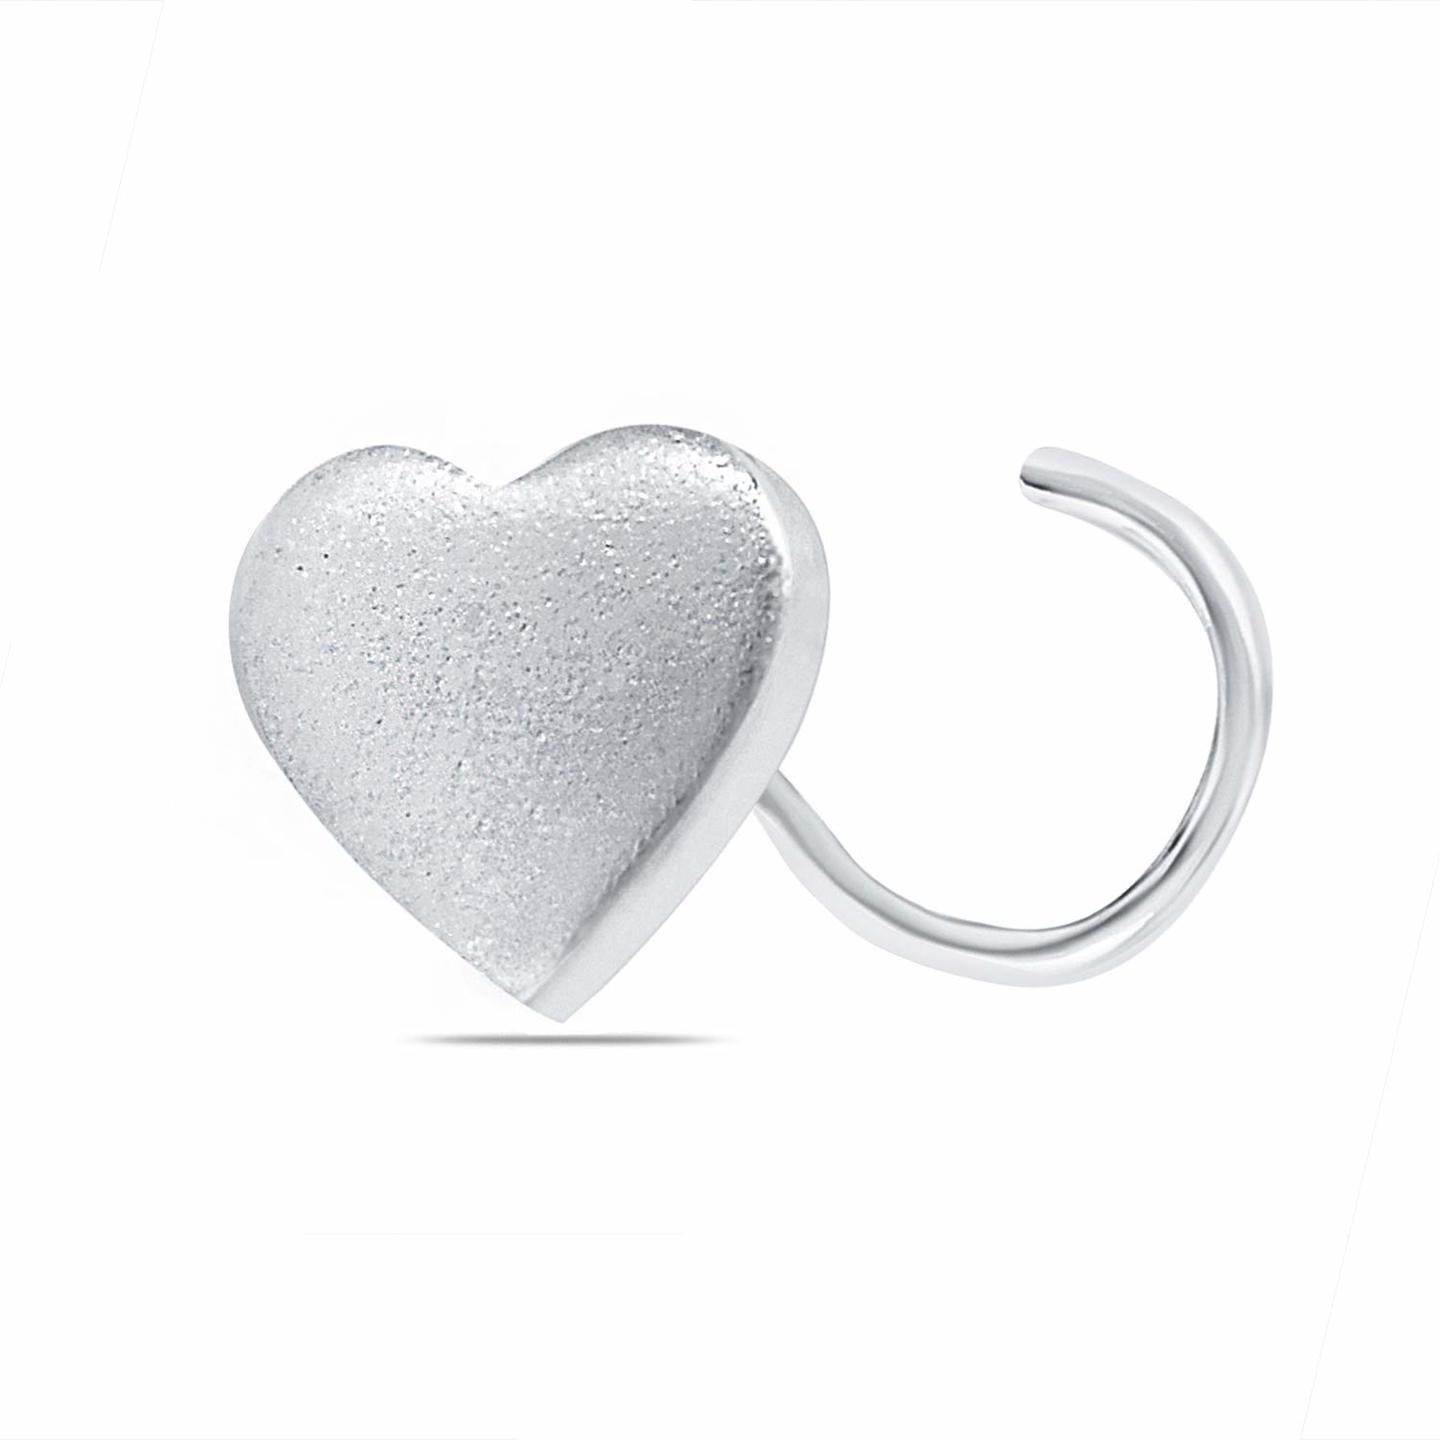 Nemichand Jewels 925 Sterling Silver Heart Nose pin